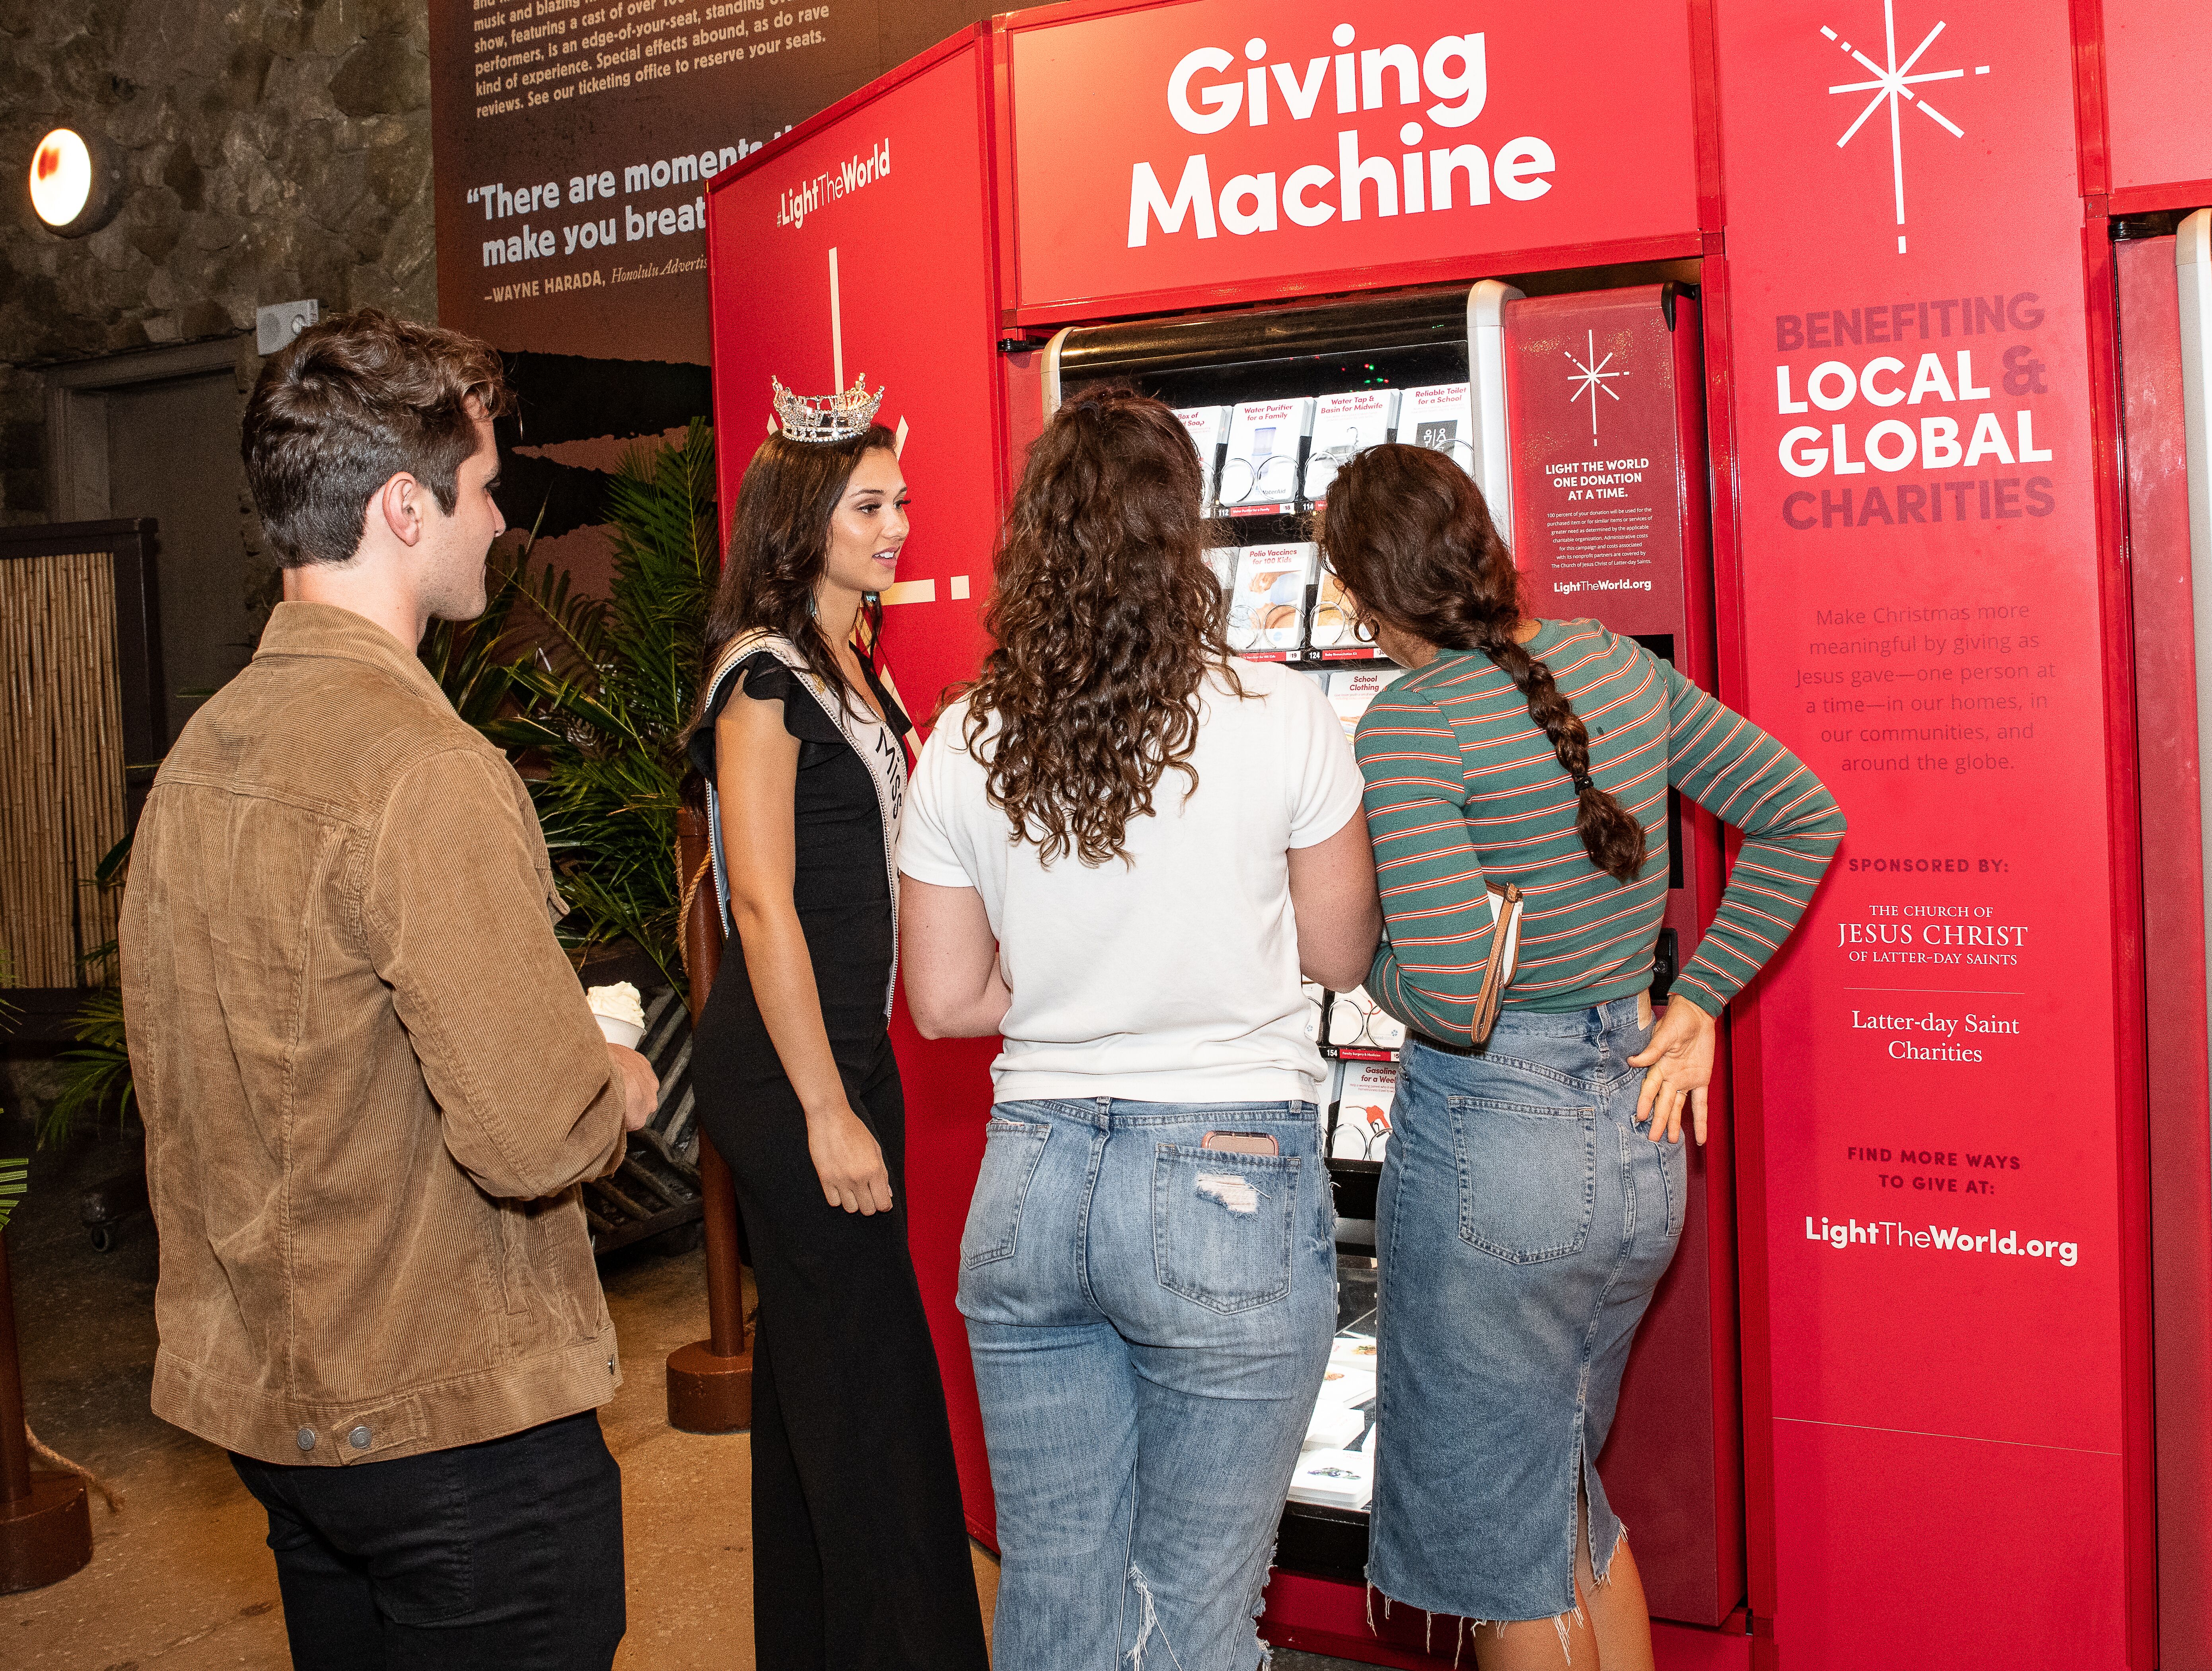 Photo of Miss Hawaii, Nikki Holbrook, helping 3 visitors to place their donation order at the Giving Machine